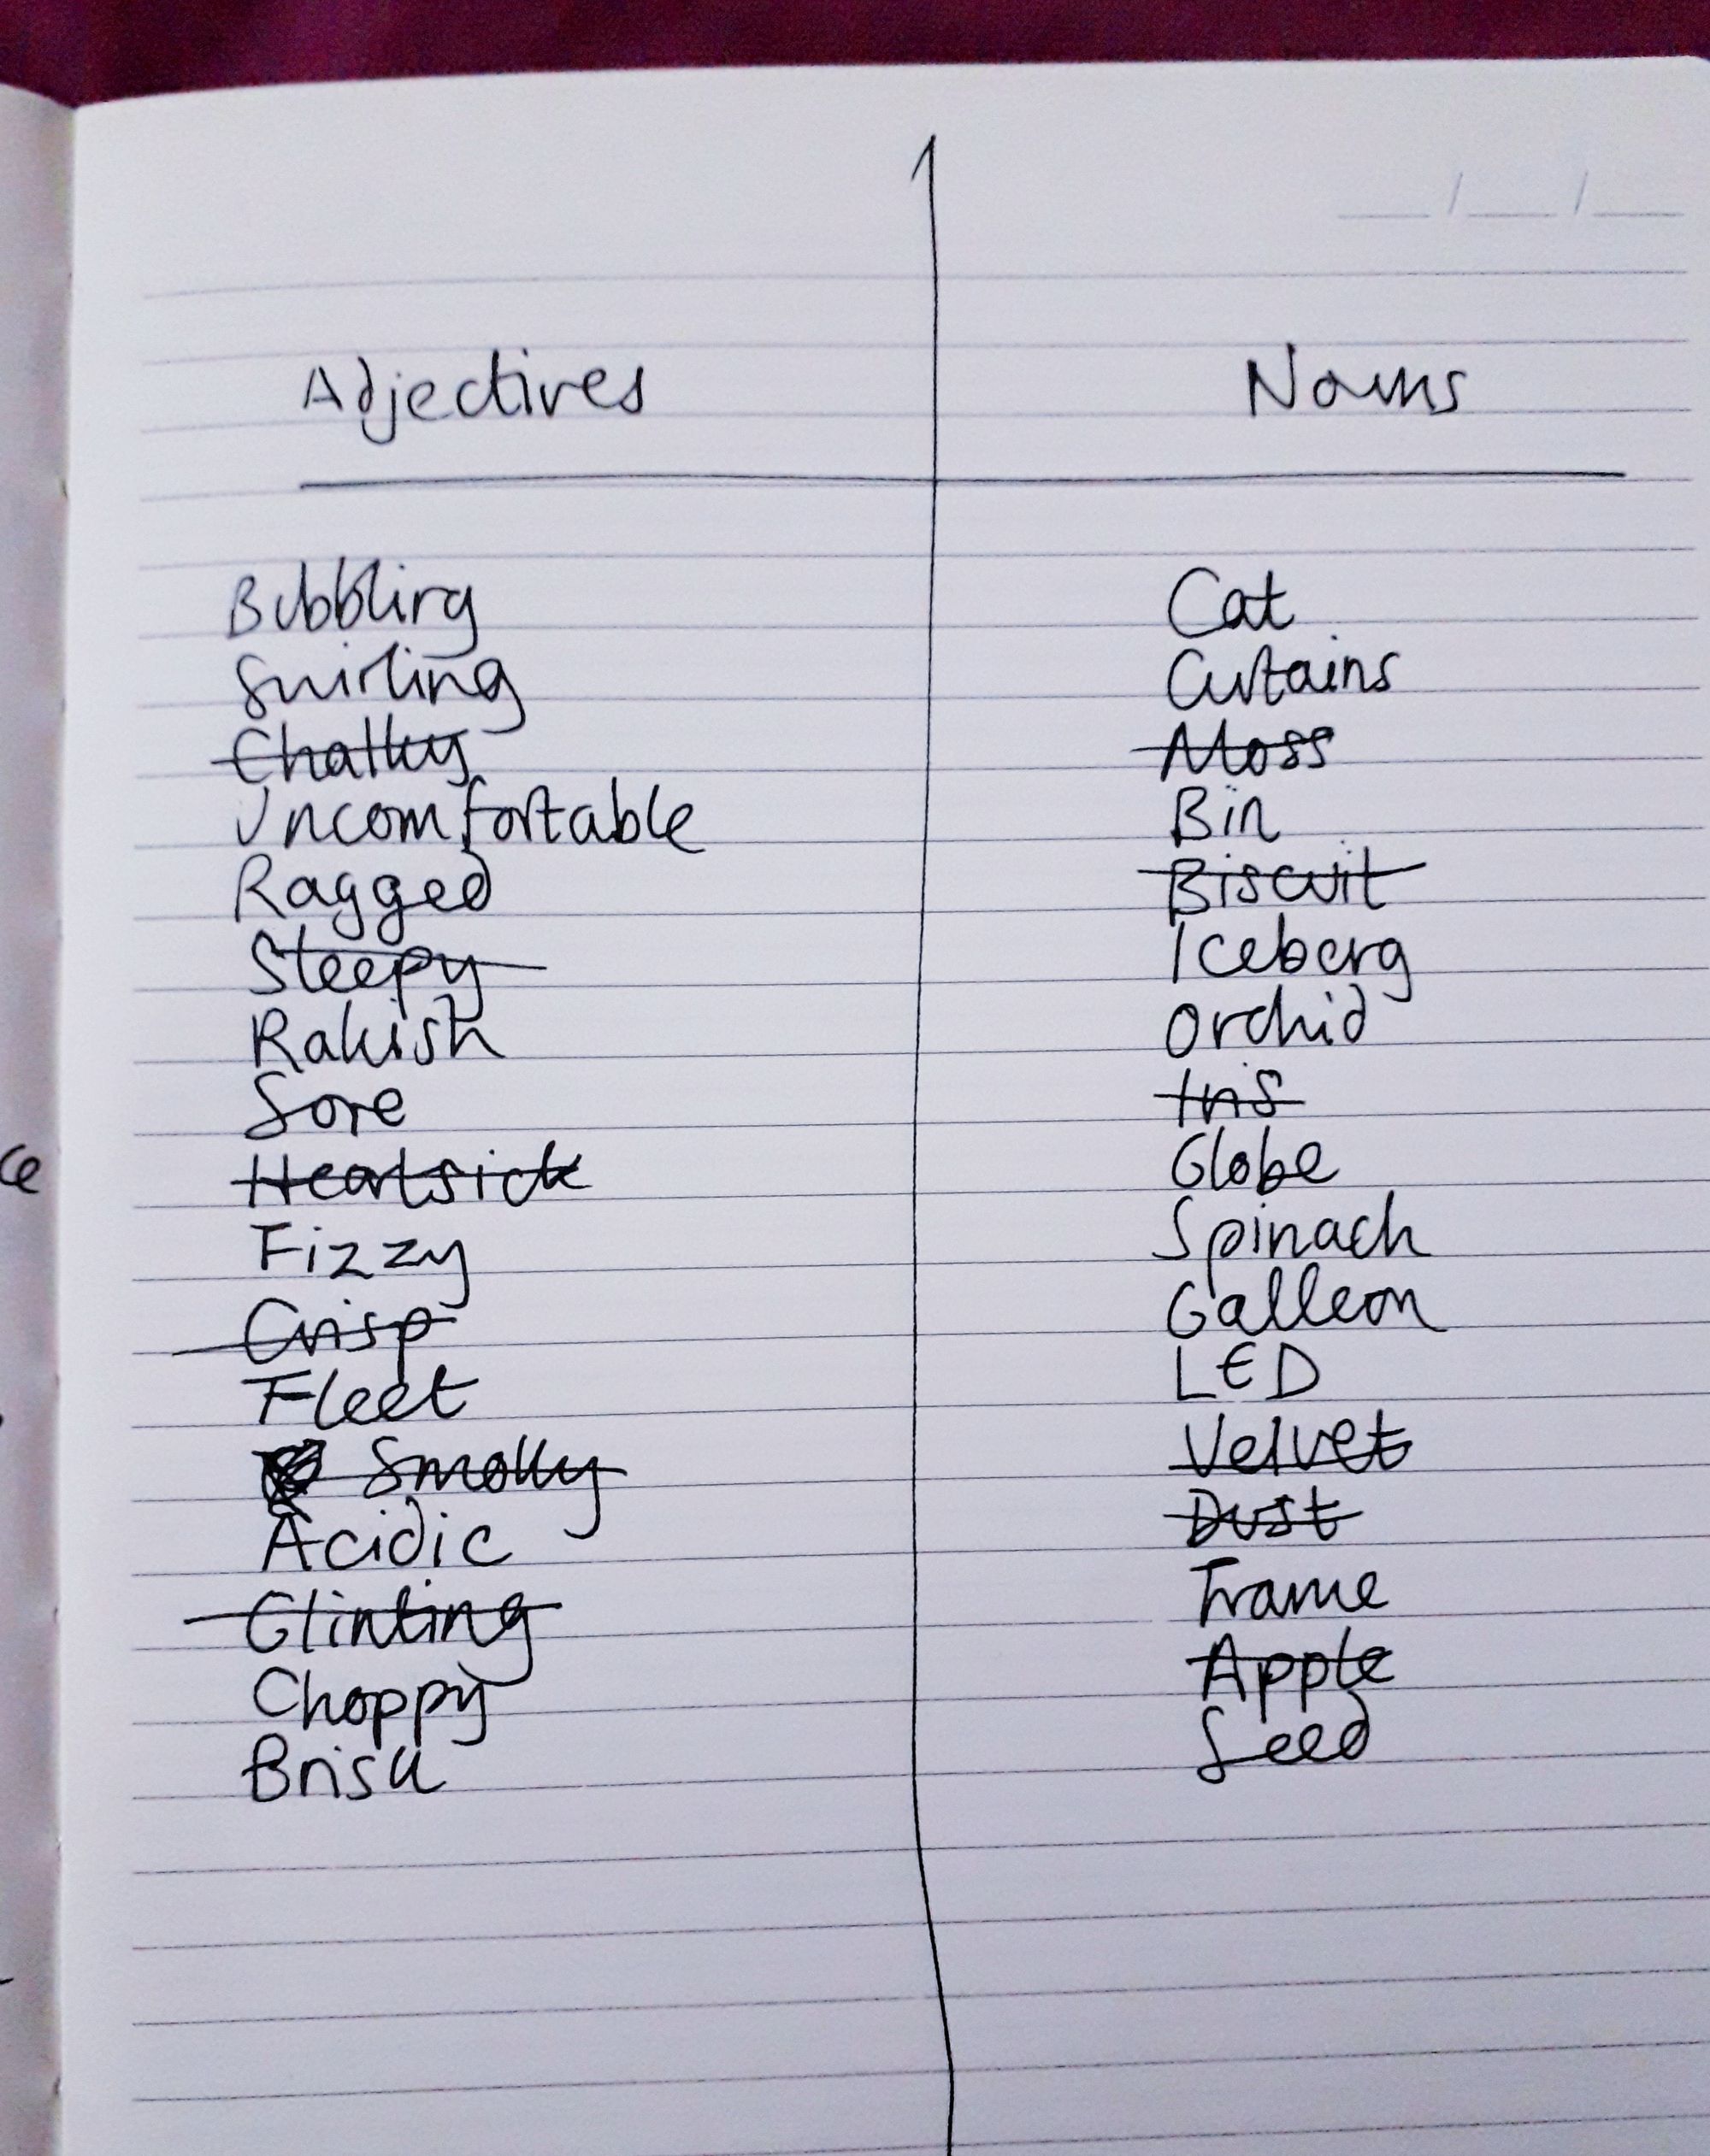 Photo of a page from a lined journal with a list of adjectives on the left and a list of nouns on the right.